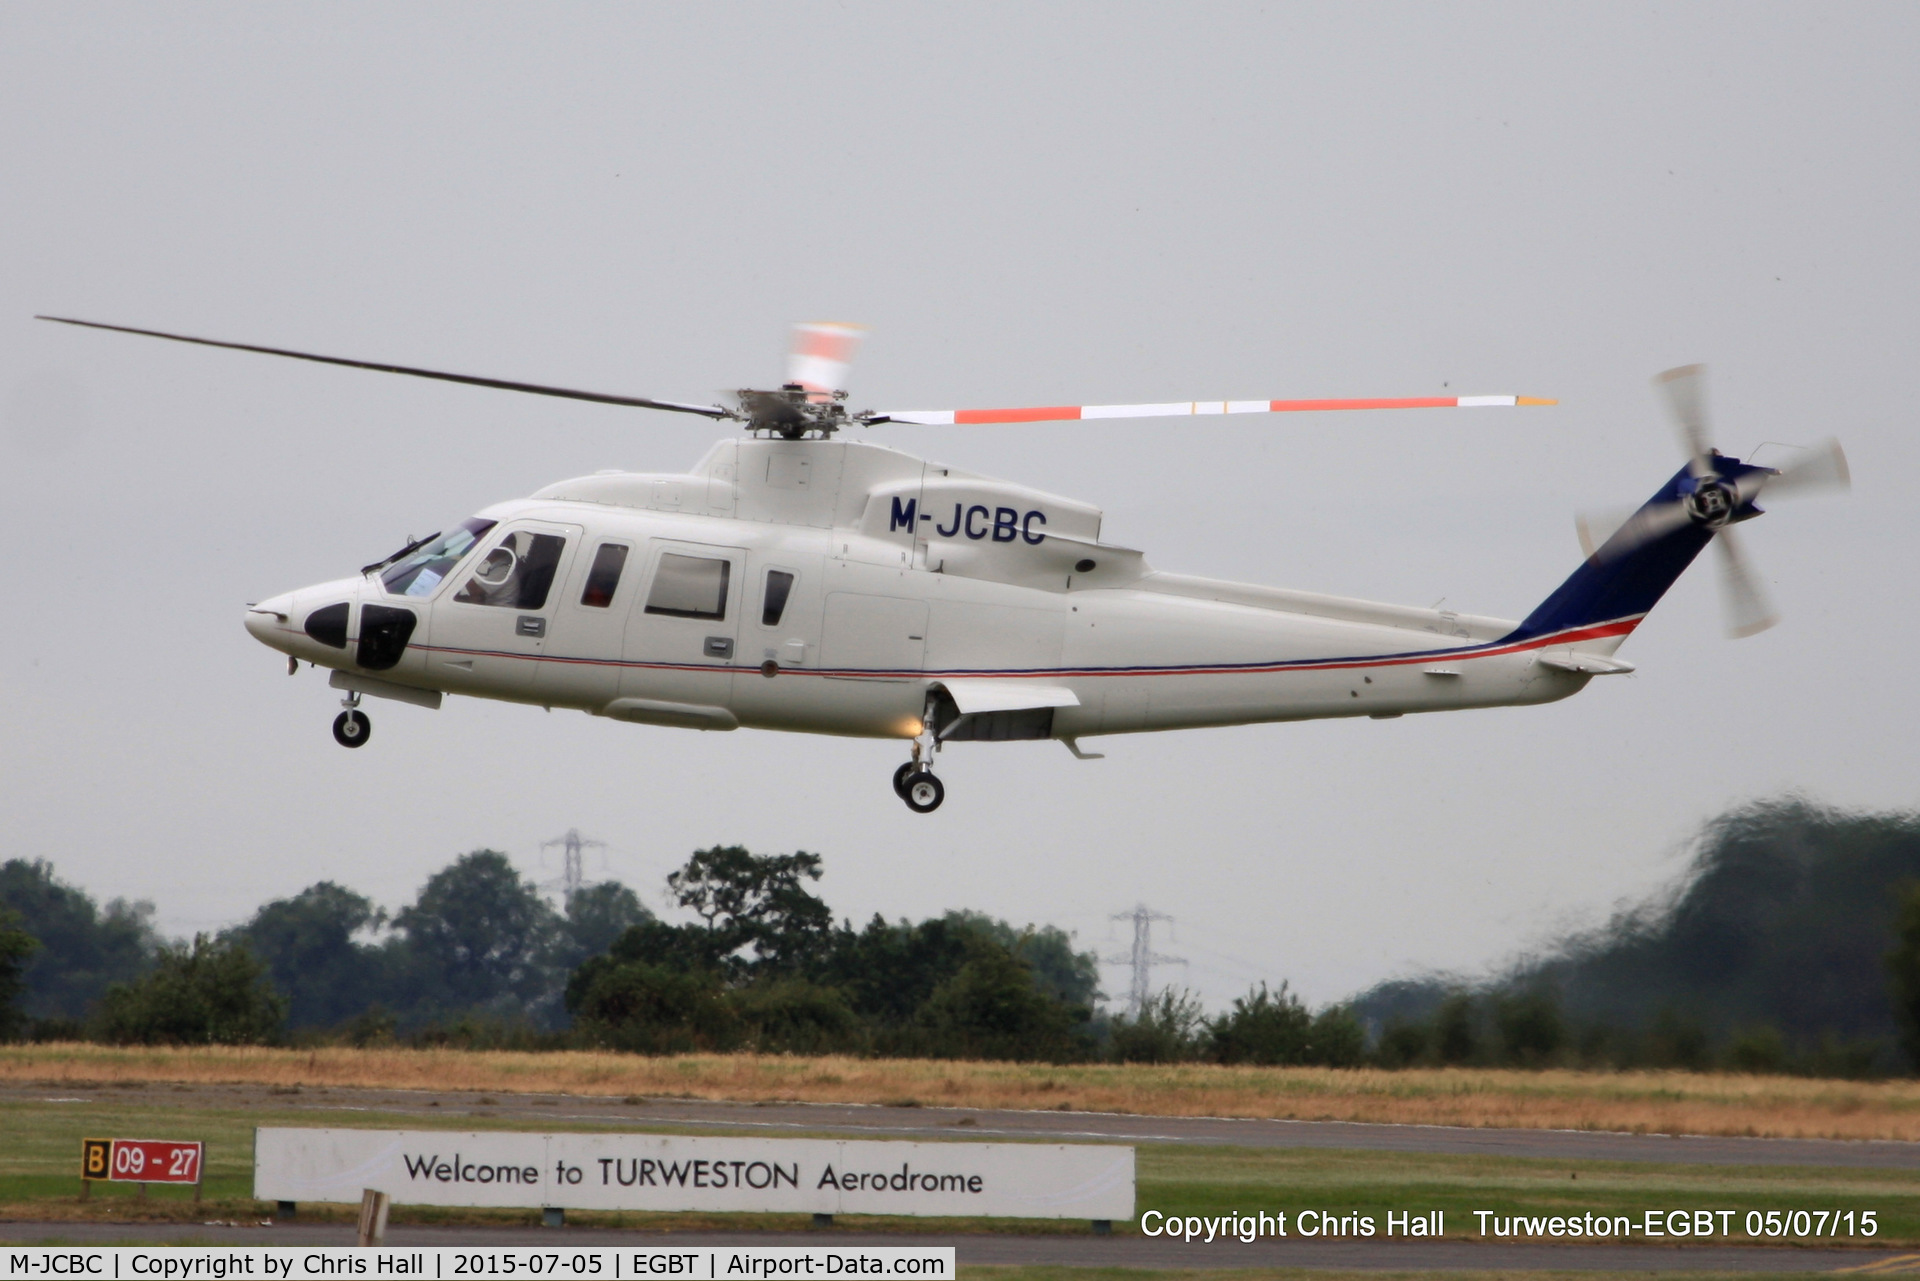 M-JCBC, 2006 Sikorsky S-76C C/N 760616, ferrying race fans to the British F1 Grand Prix at Silverstone